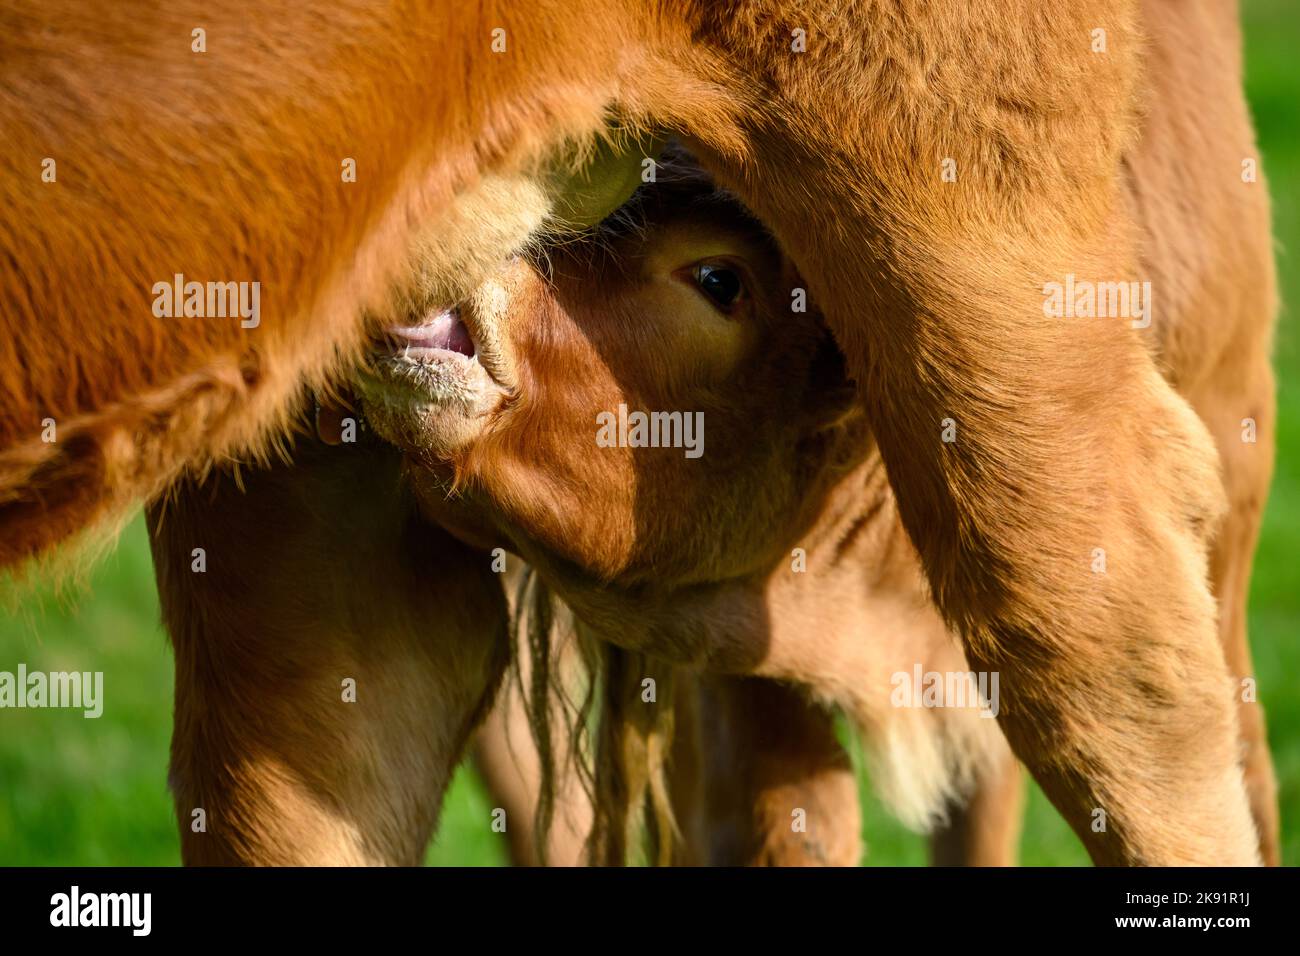 Sunlit brown cow & small newborn calf standing in farm field (thirsty youngster, mother's milk, staring at camera, close-up) - Yorkshire, England, UK. Stock Photo